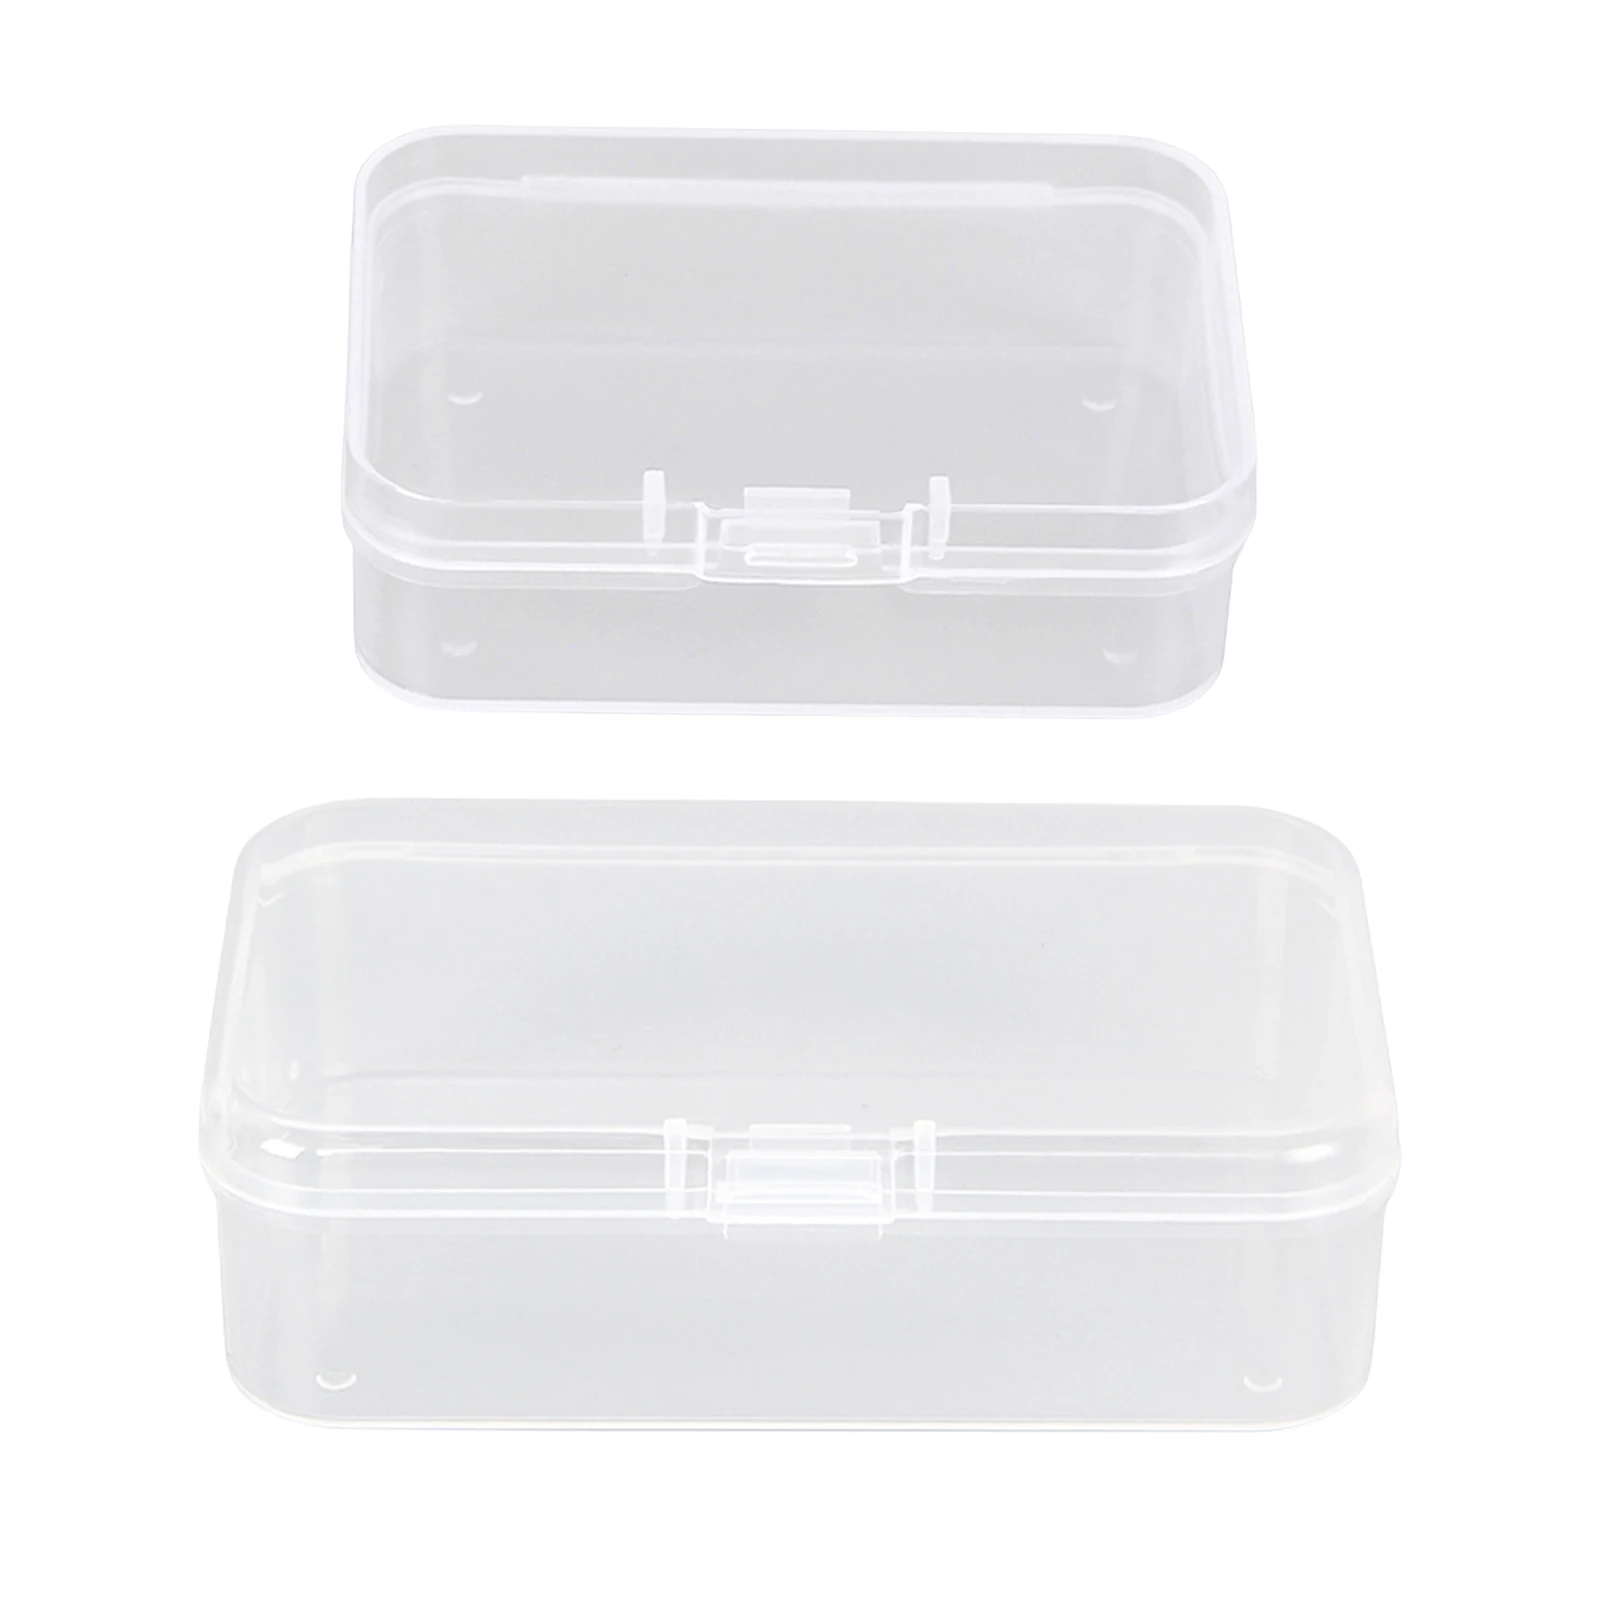 Storage Case Box Multi-functional Organizers and Storage Case for Hardware, Screws, Bolts, Nuts, Nails, Tools, Arts,